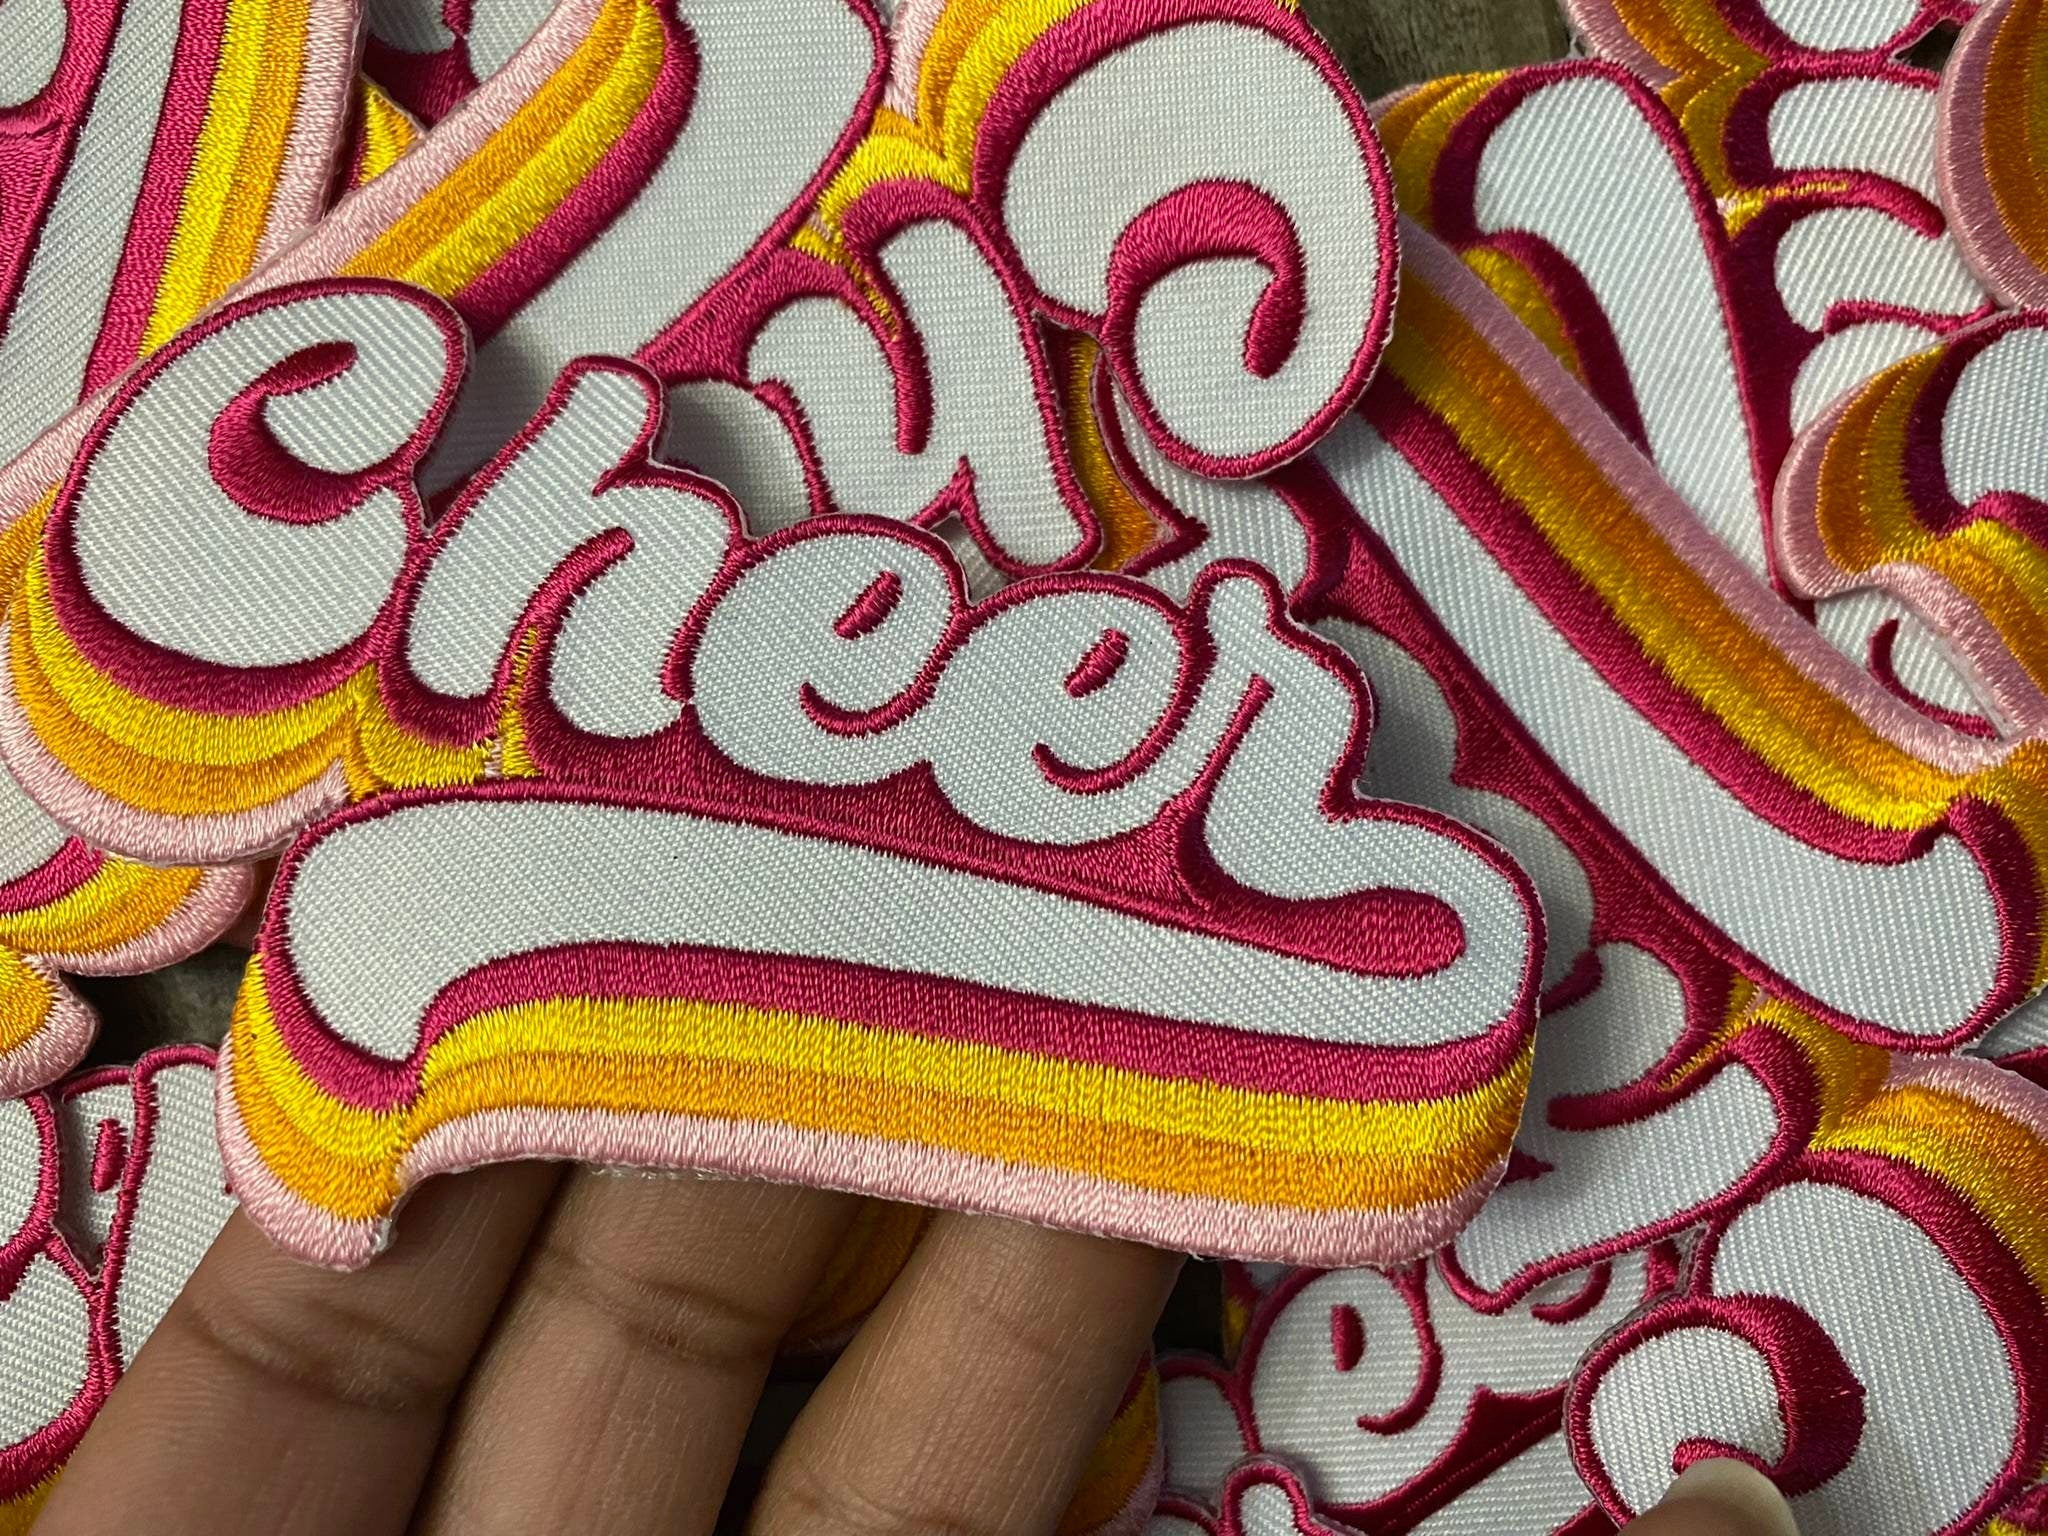 Embroidery, "Colorful Cheer" Pink/Gold/Orange/White, Varsity Patch, Iron-on Applique for Jackets, Camo, & Bags, Size 5.5", Cheerleader Patch